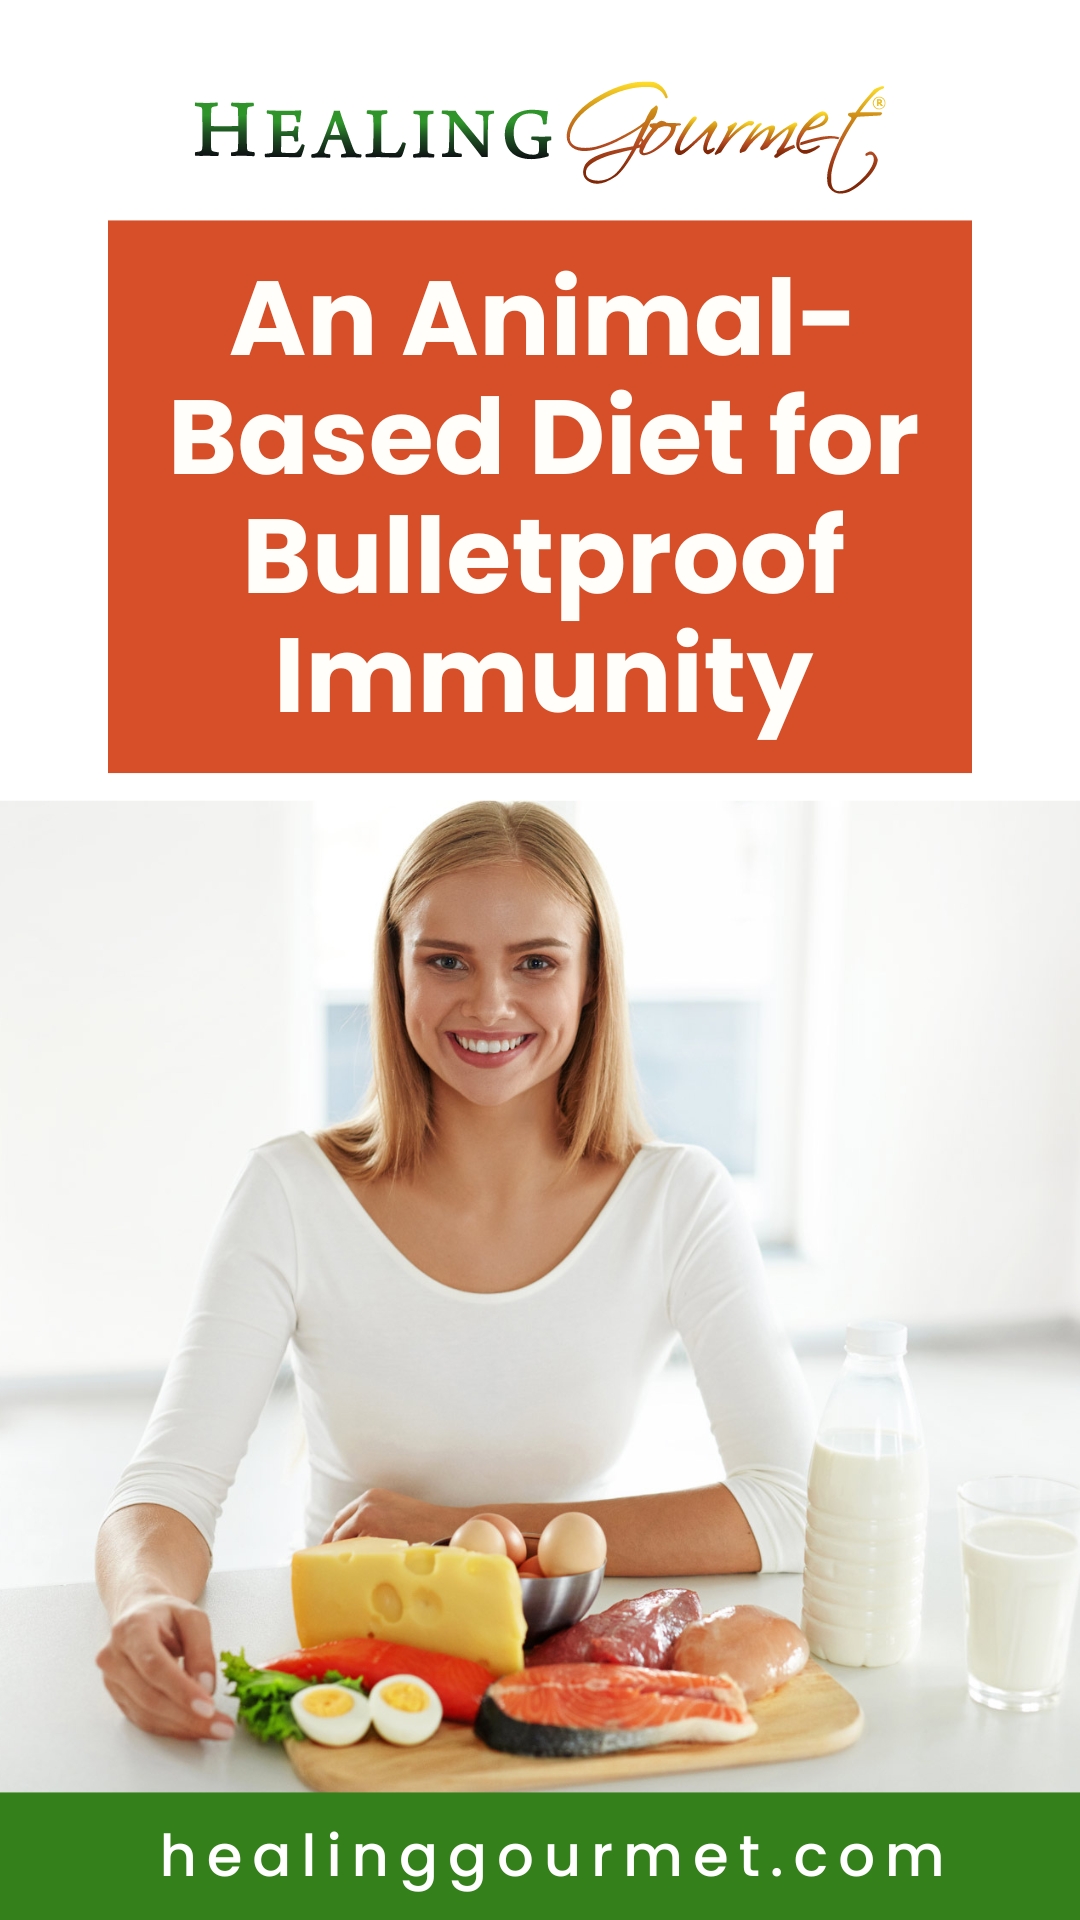 Bulletproof Your Immune System with an Animal Based Diet